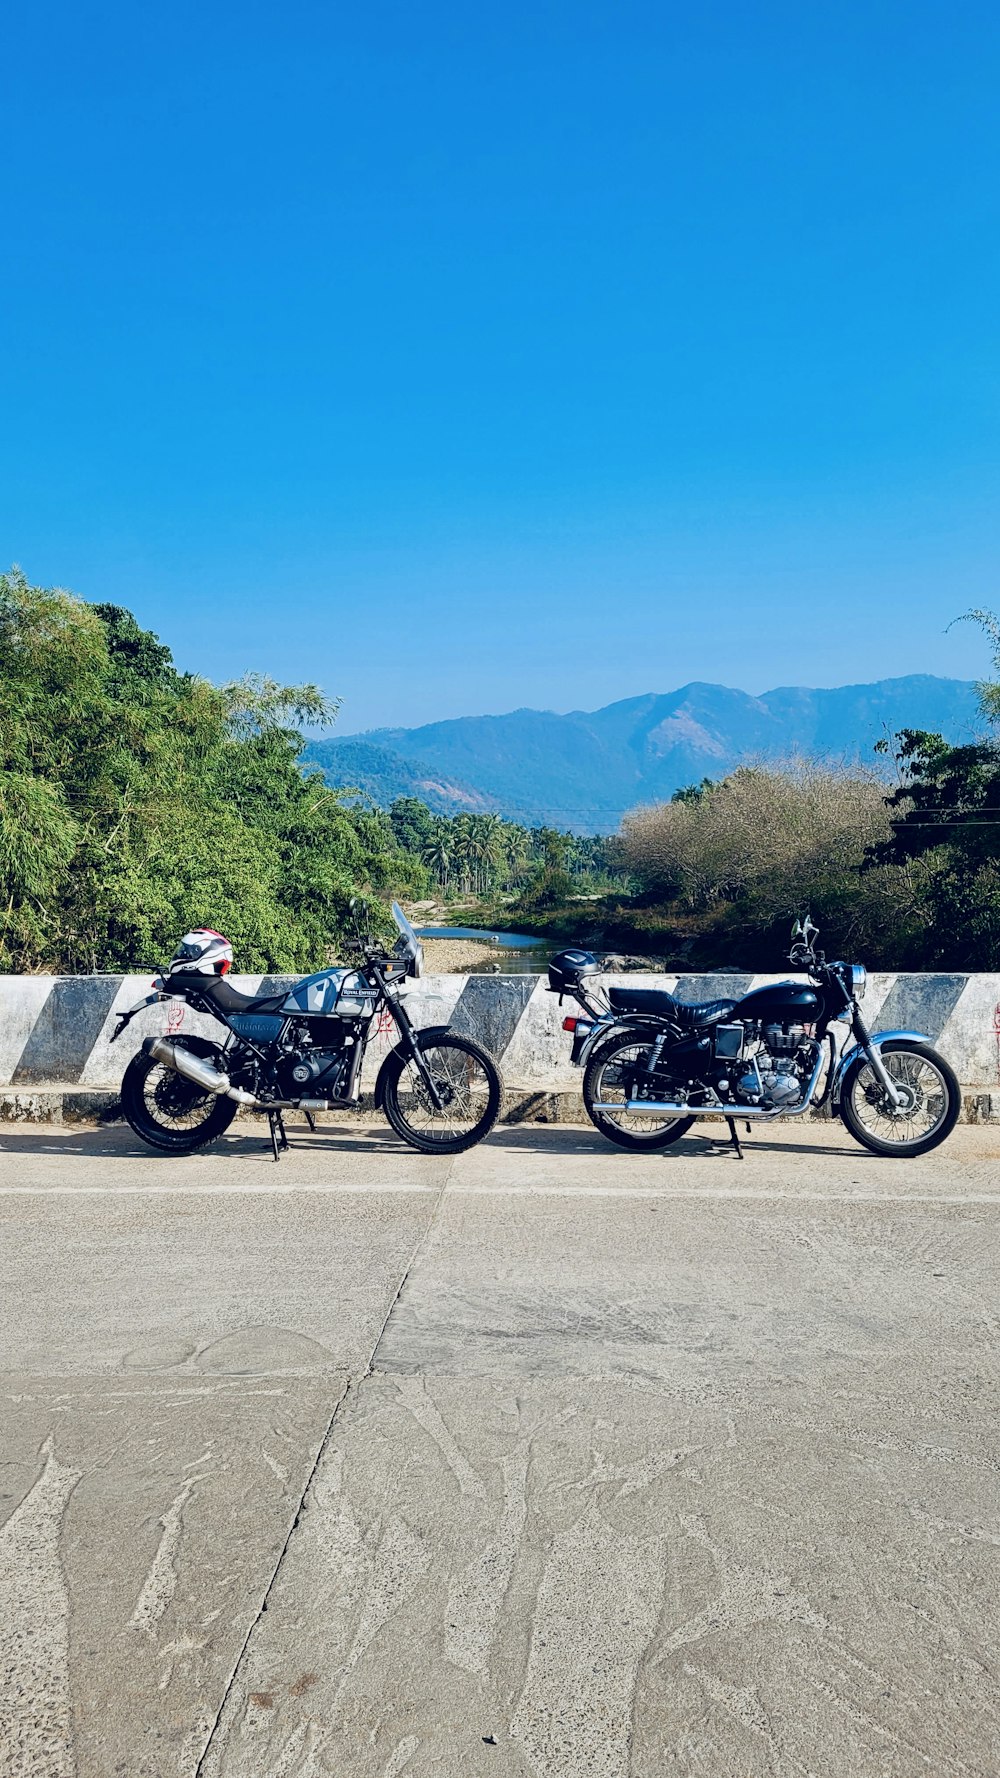 two motorcycles parked on the side of a road